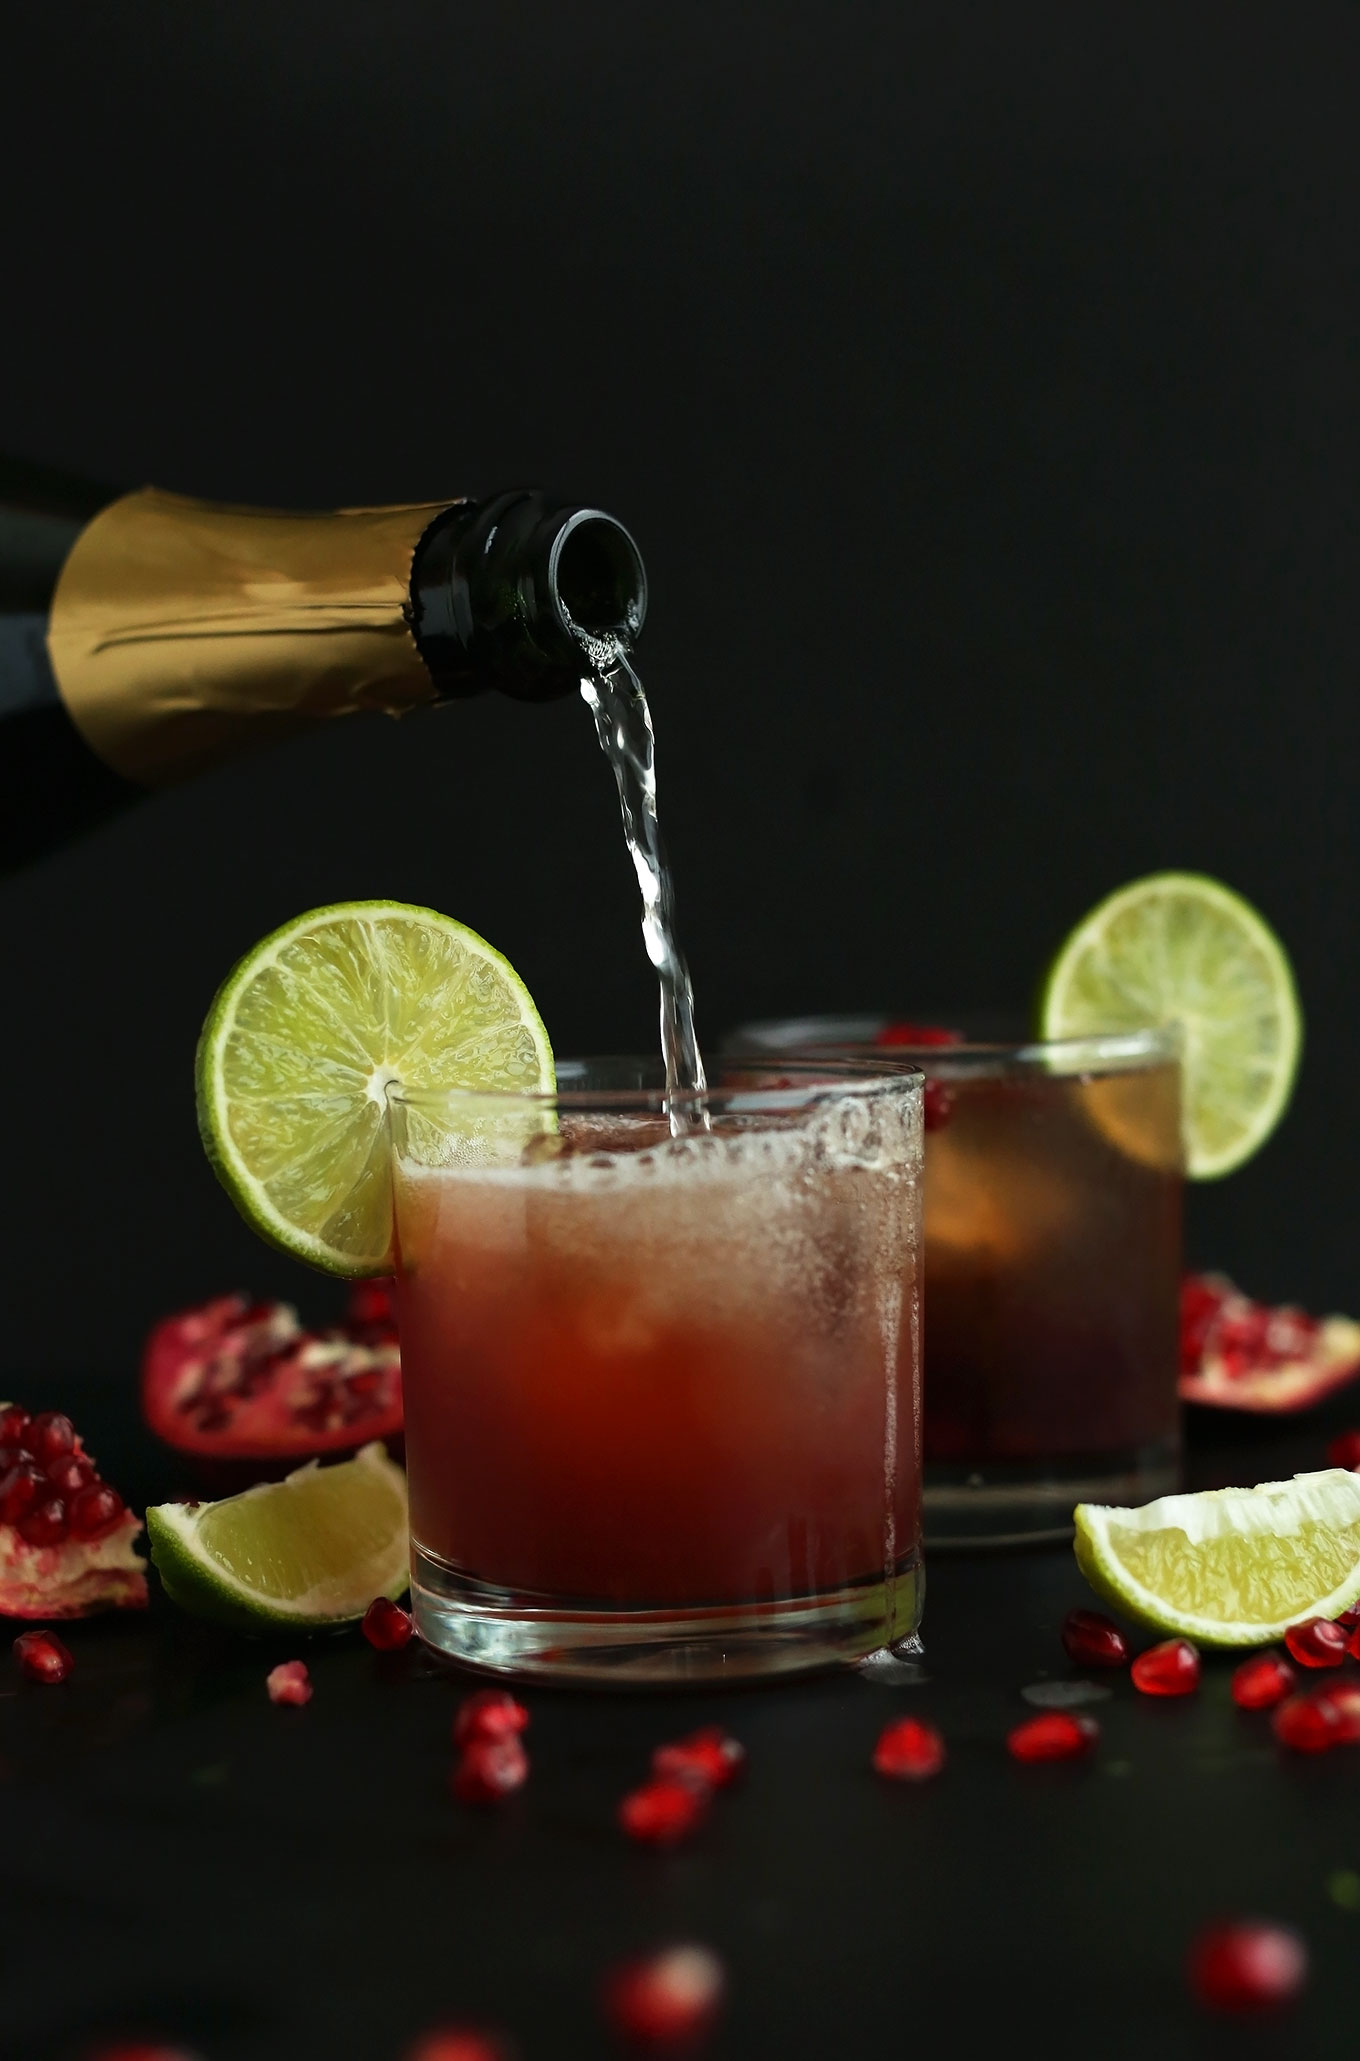 Adding champagne to make a New Year's Eve Sparkling Pomegranate Margarita